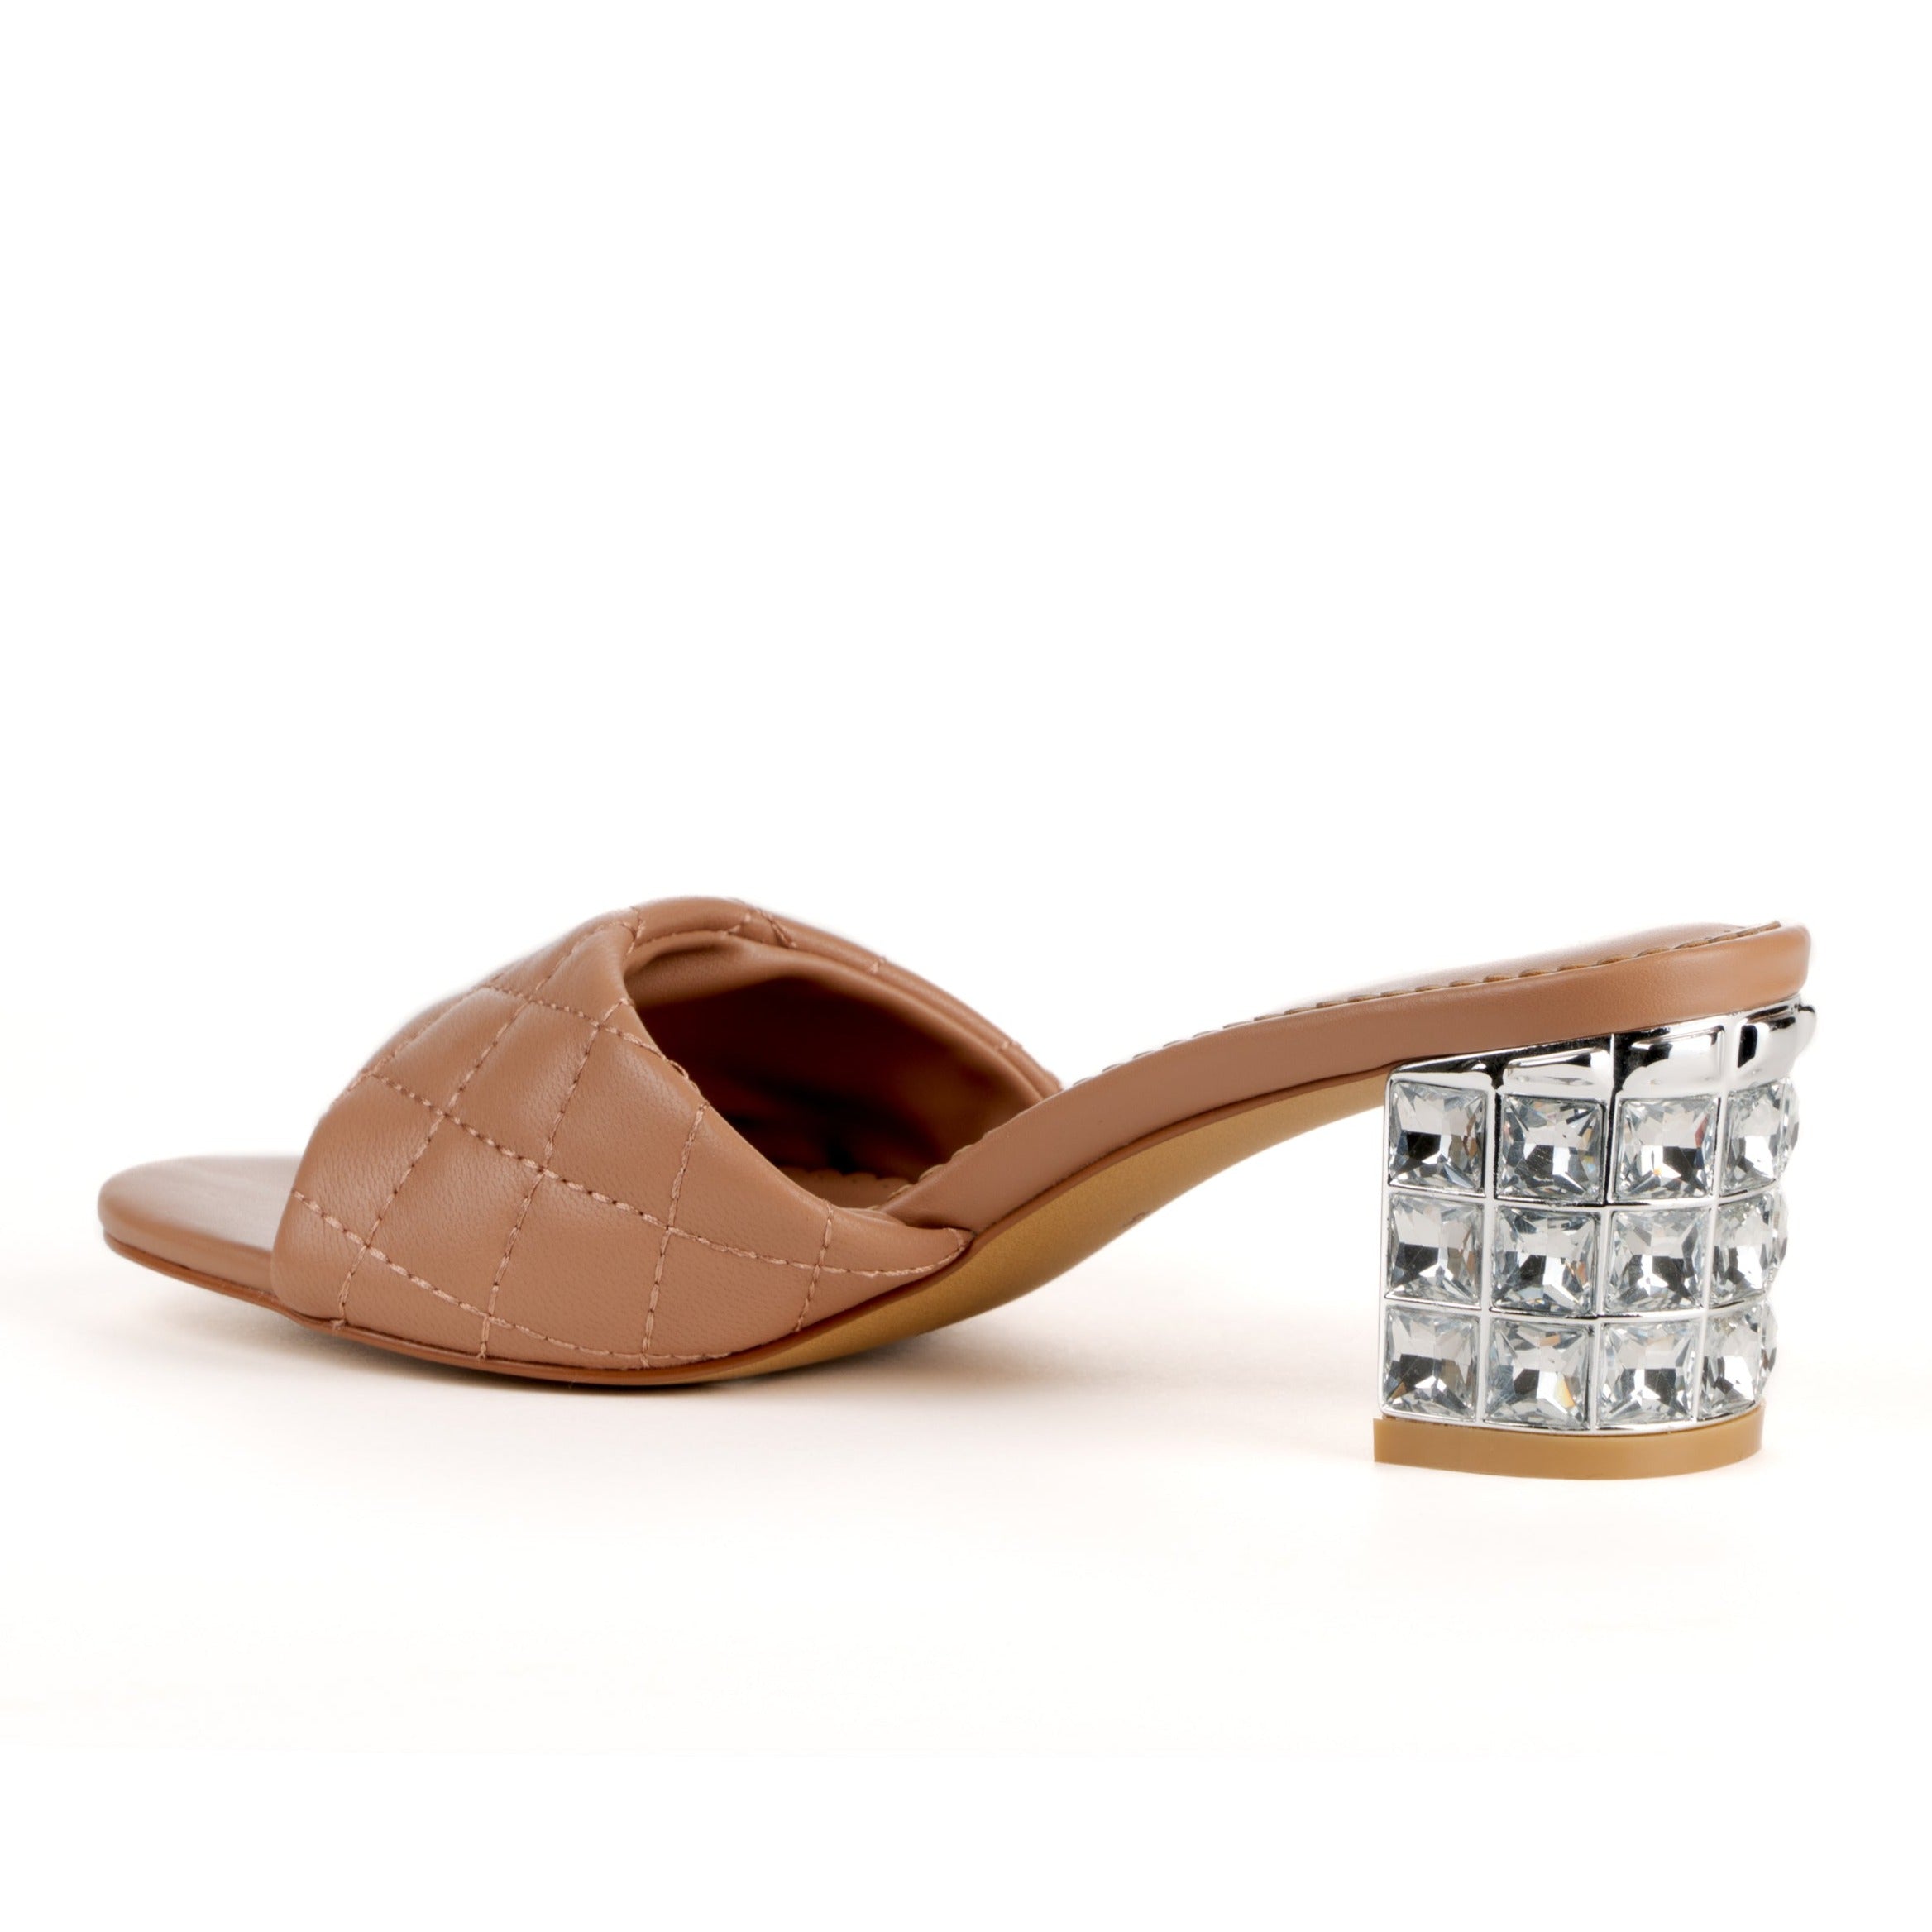 Tan pearl heels with open toe and slip-on style - back view 